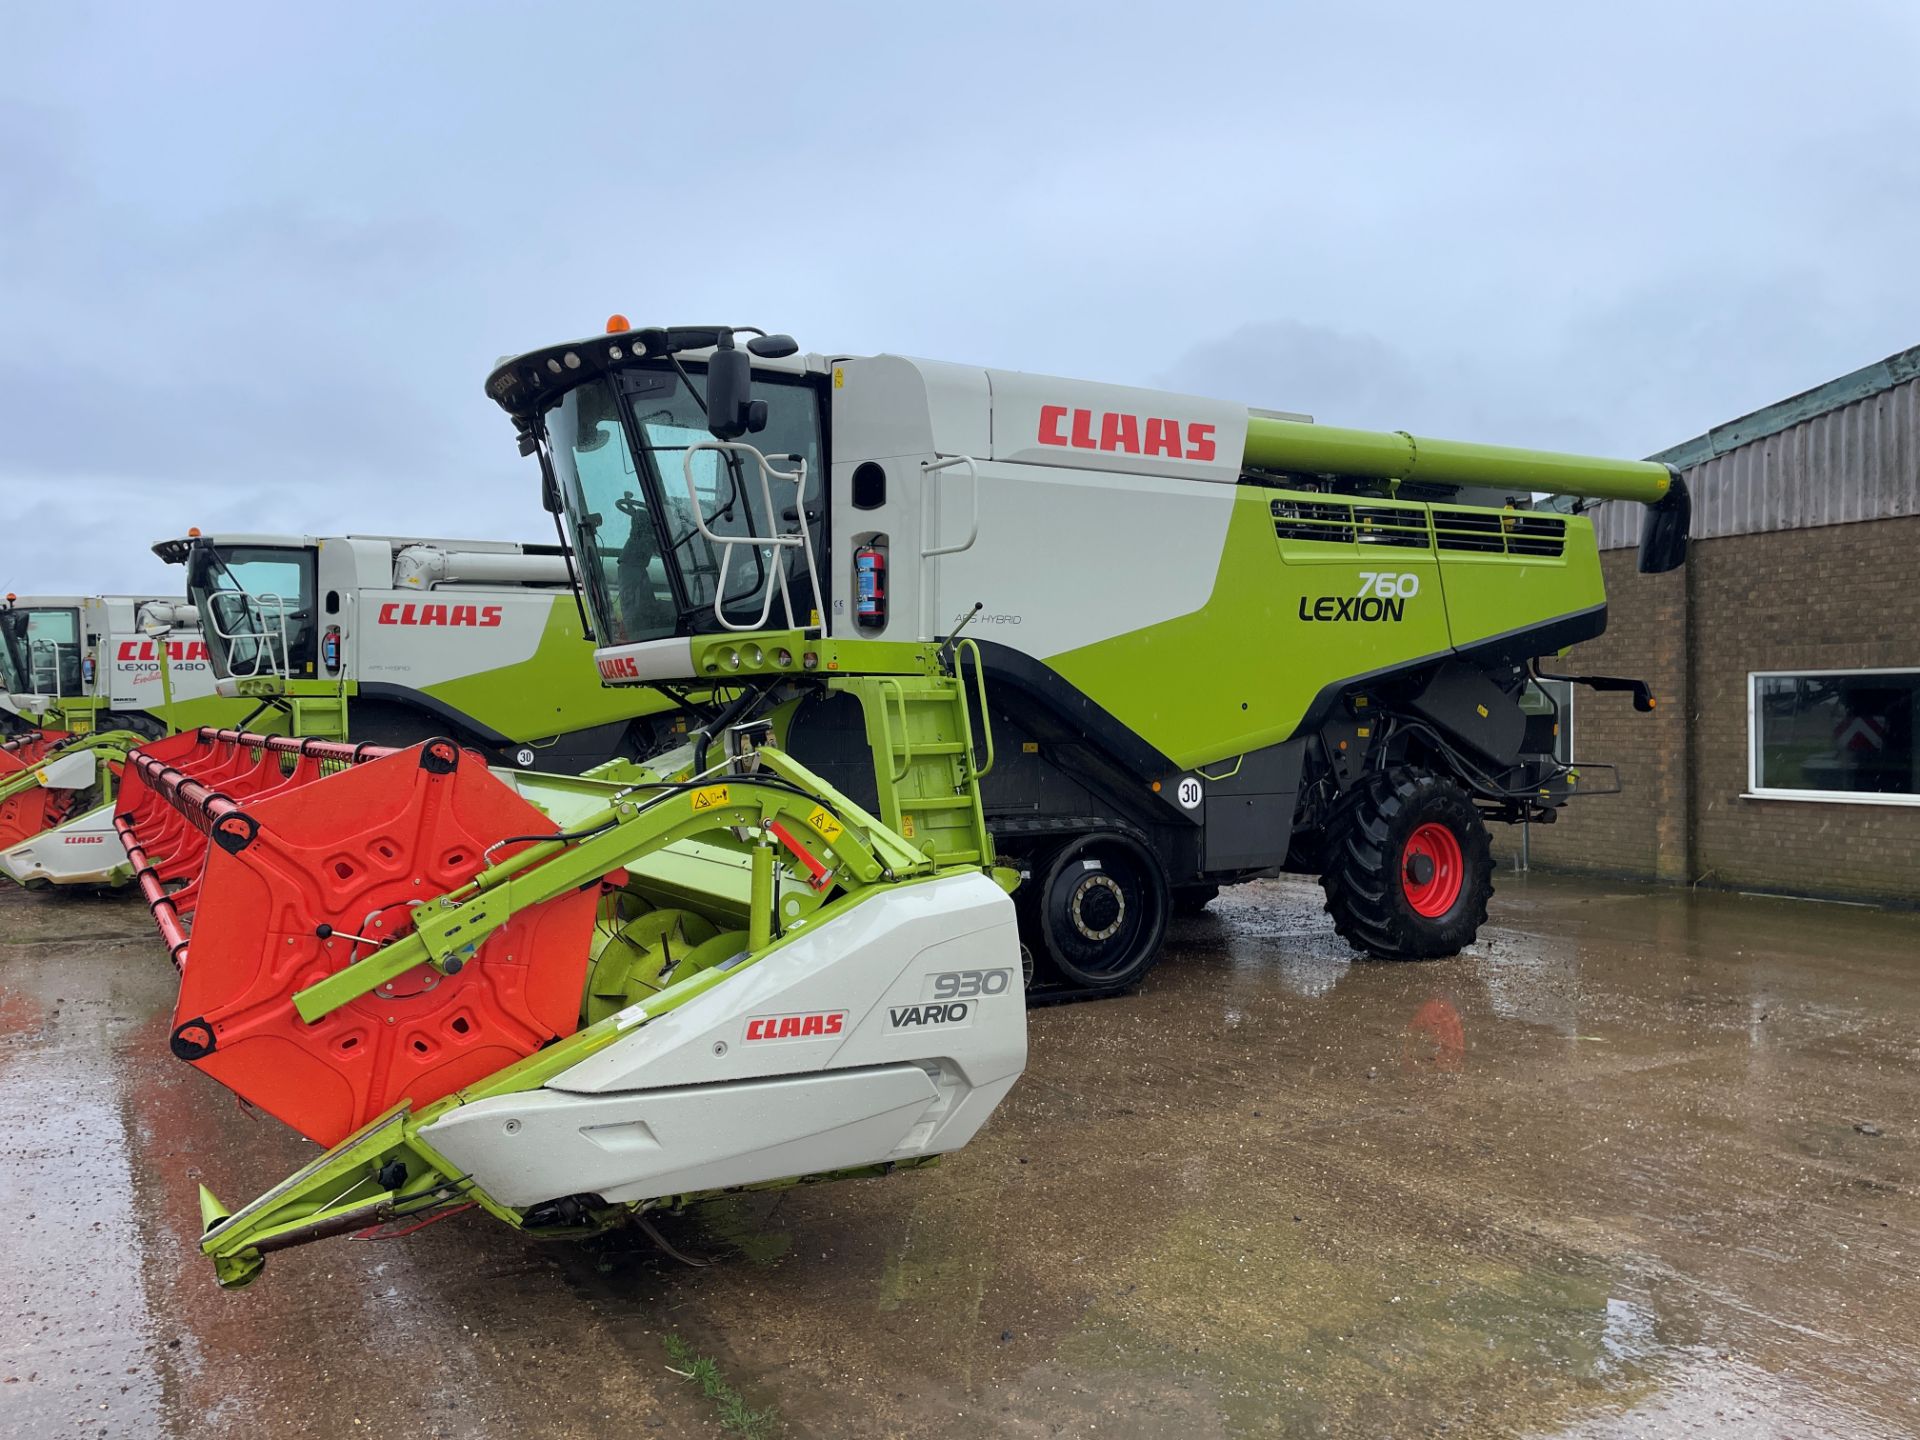 (15) Claas Lexion 760TT Terra Trac combine harvester 930 9.3m Vario cutterbar with trolley, APS - Image 4 of 5